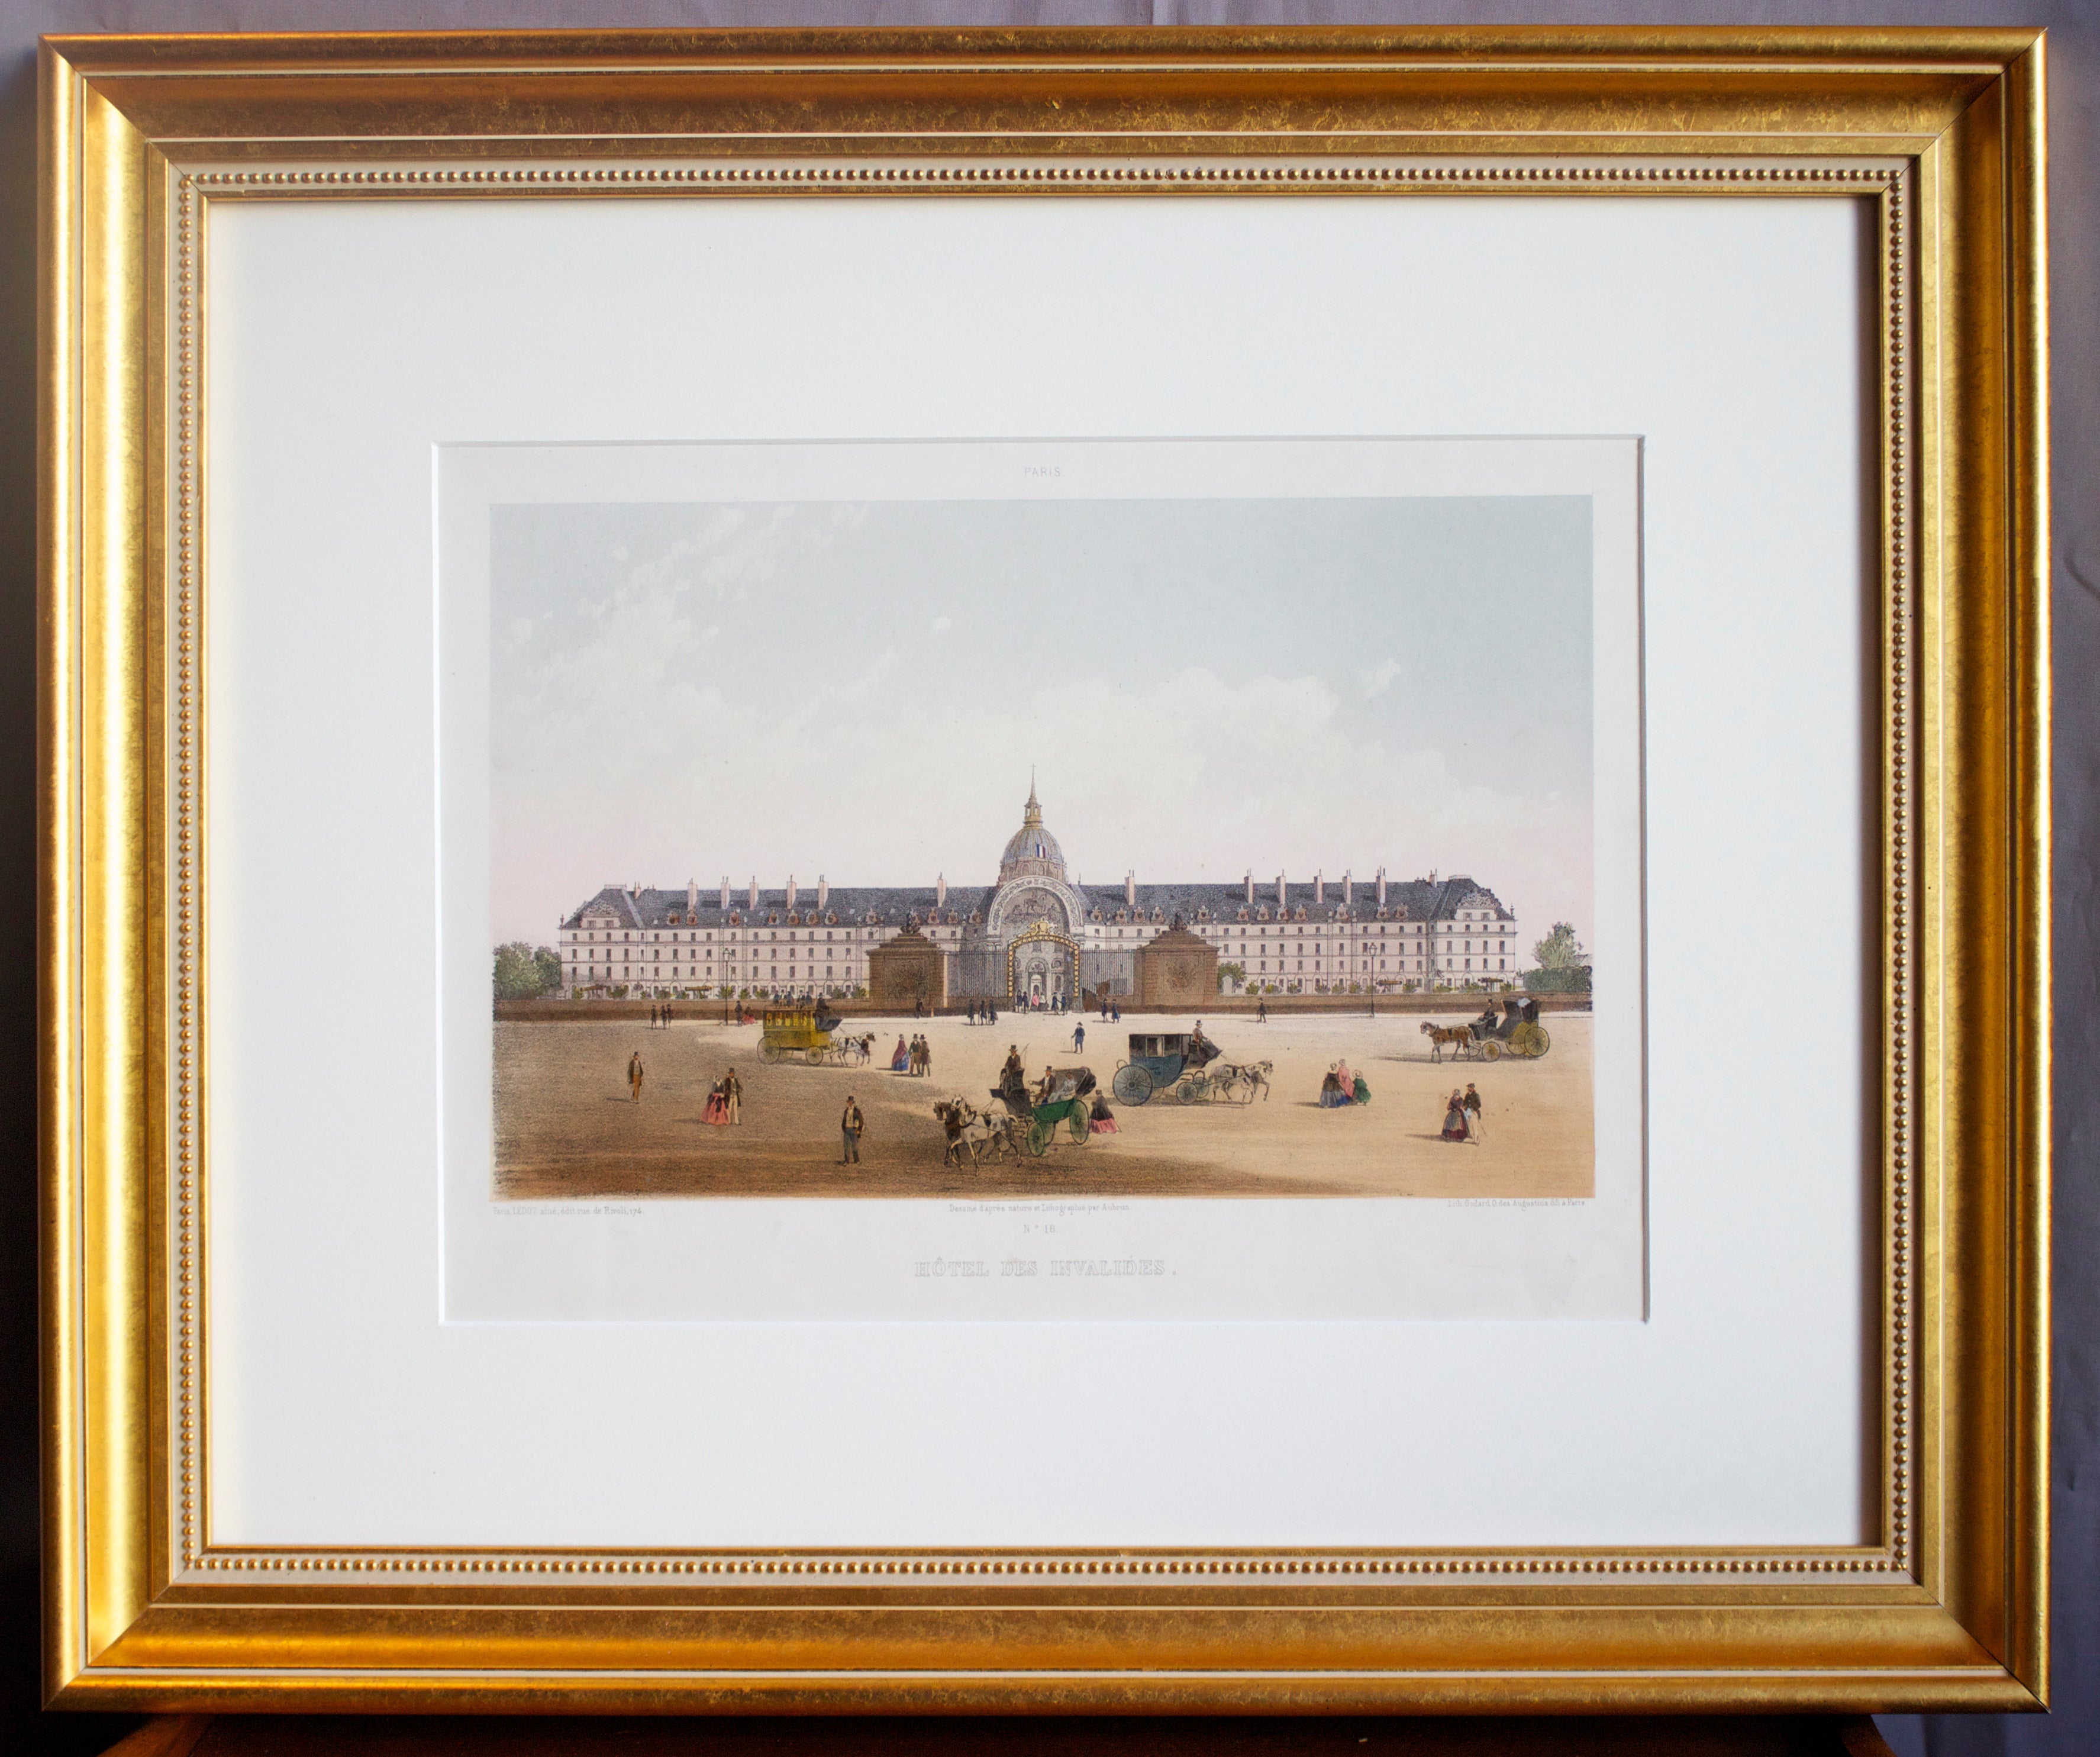 Etched Engraving of "Hotel des Invalides" in Paris For Sale